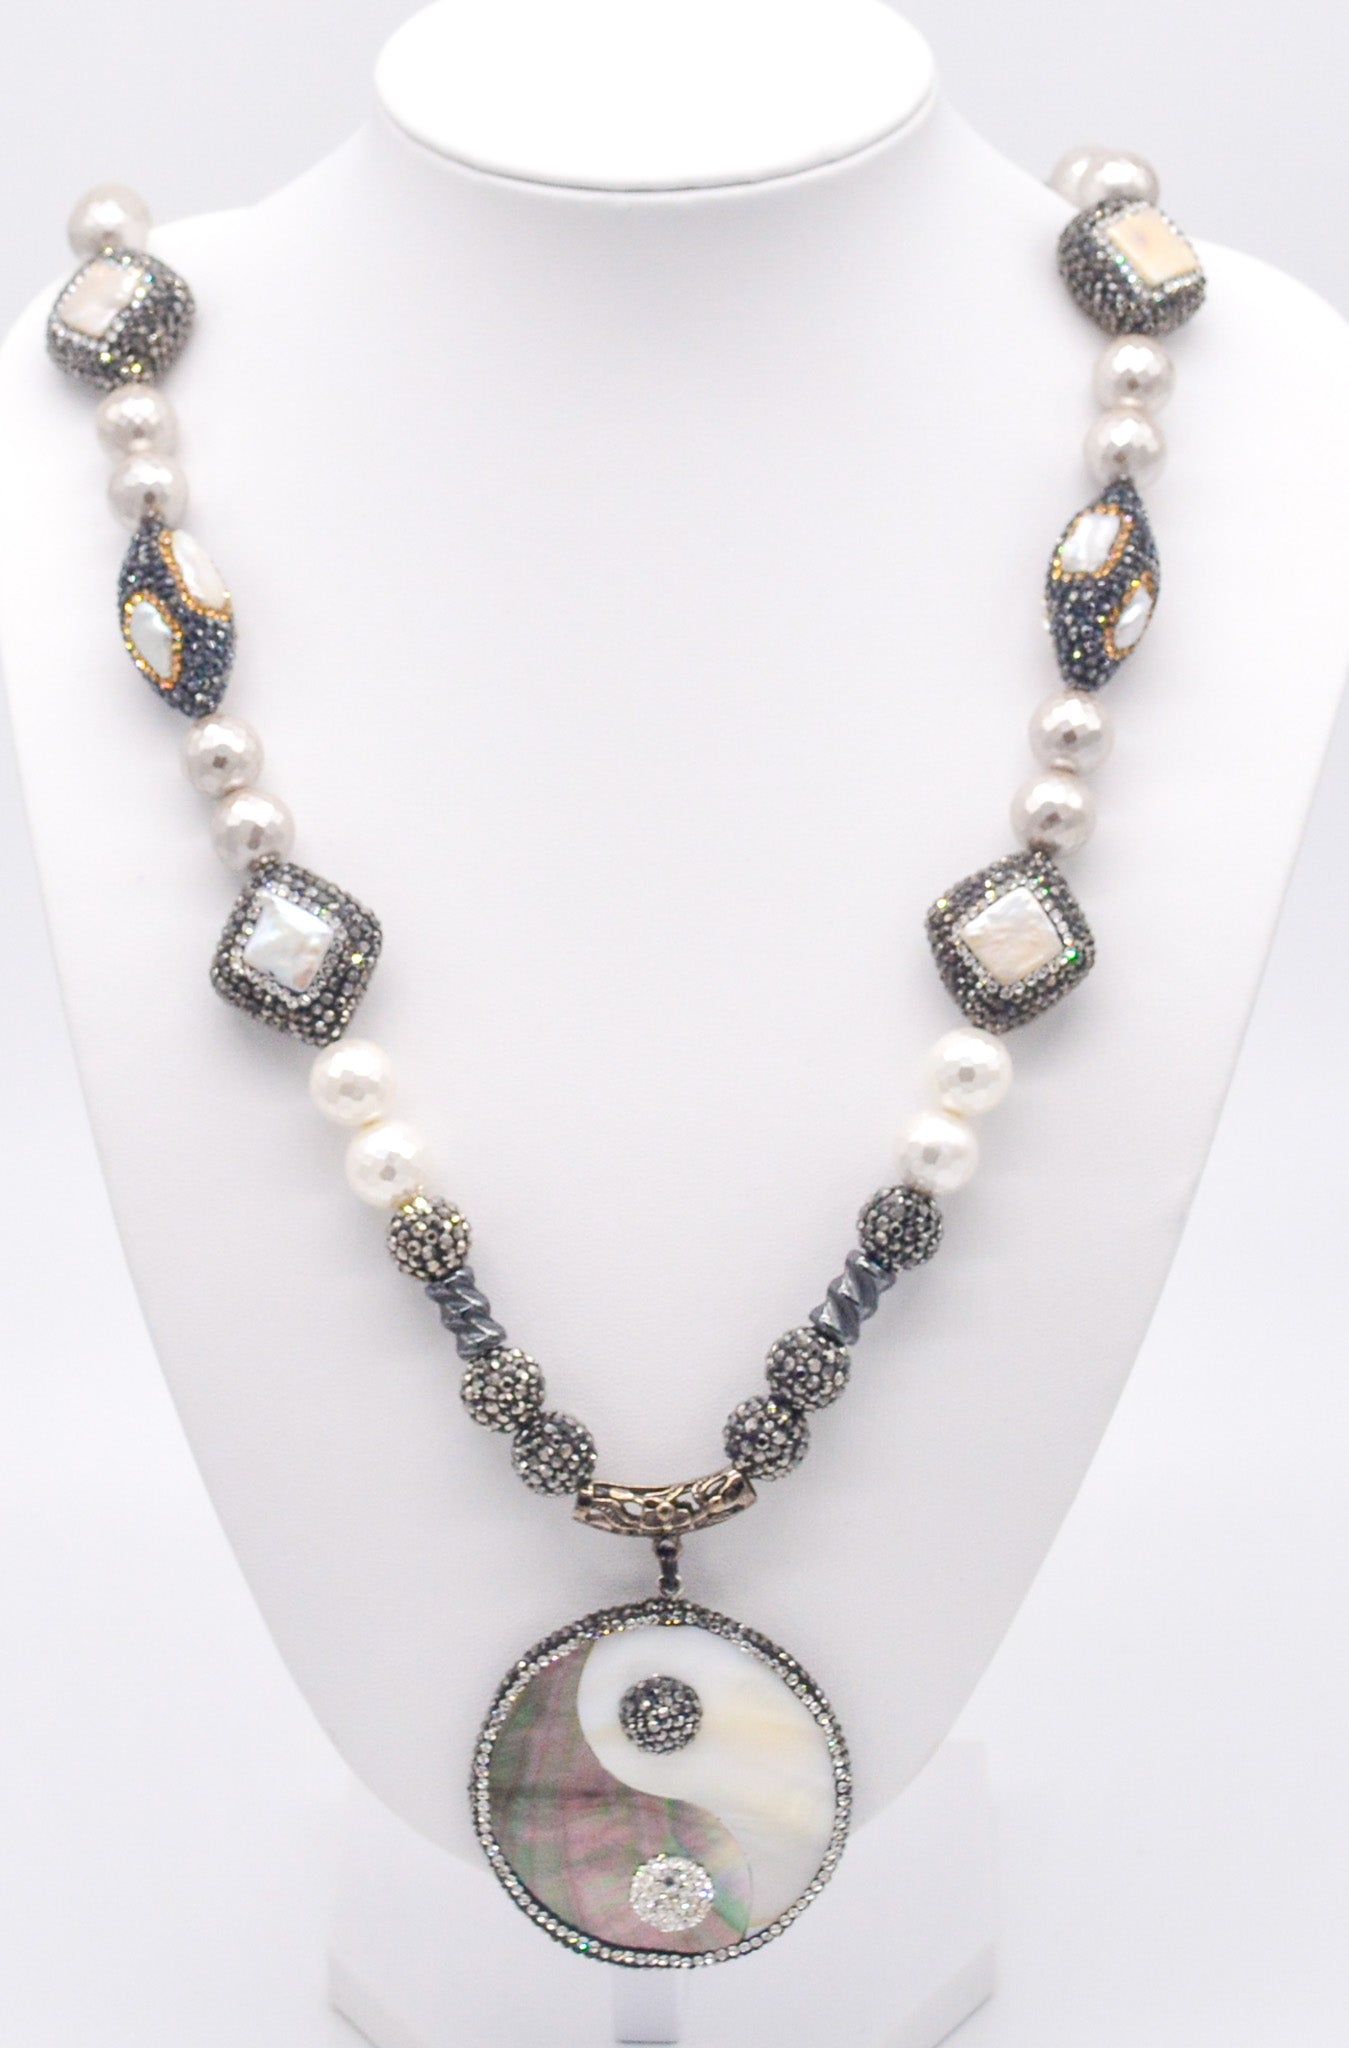 Conscious Contrast: Yin and Yang Mother of Pearl & Hematite Shamballa Necklace - Faith2Felicity